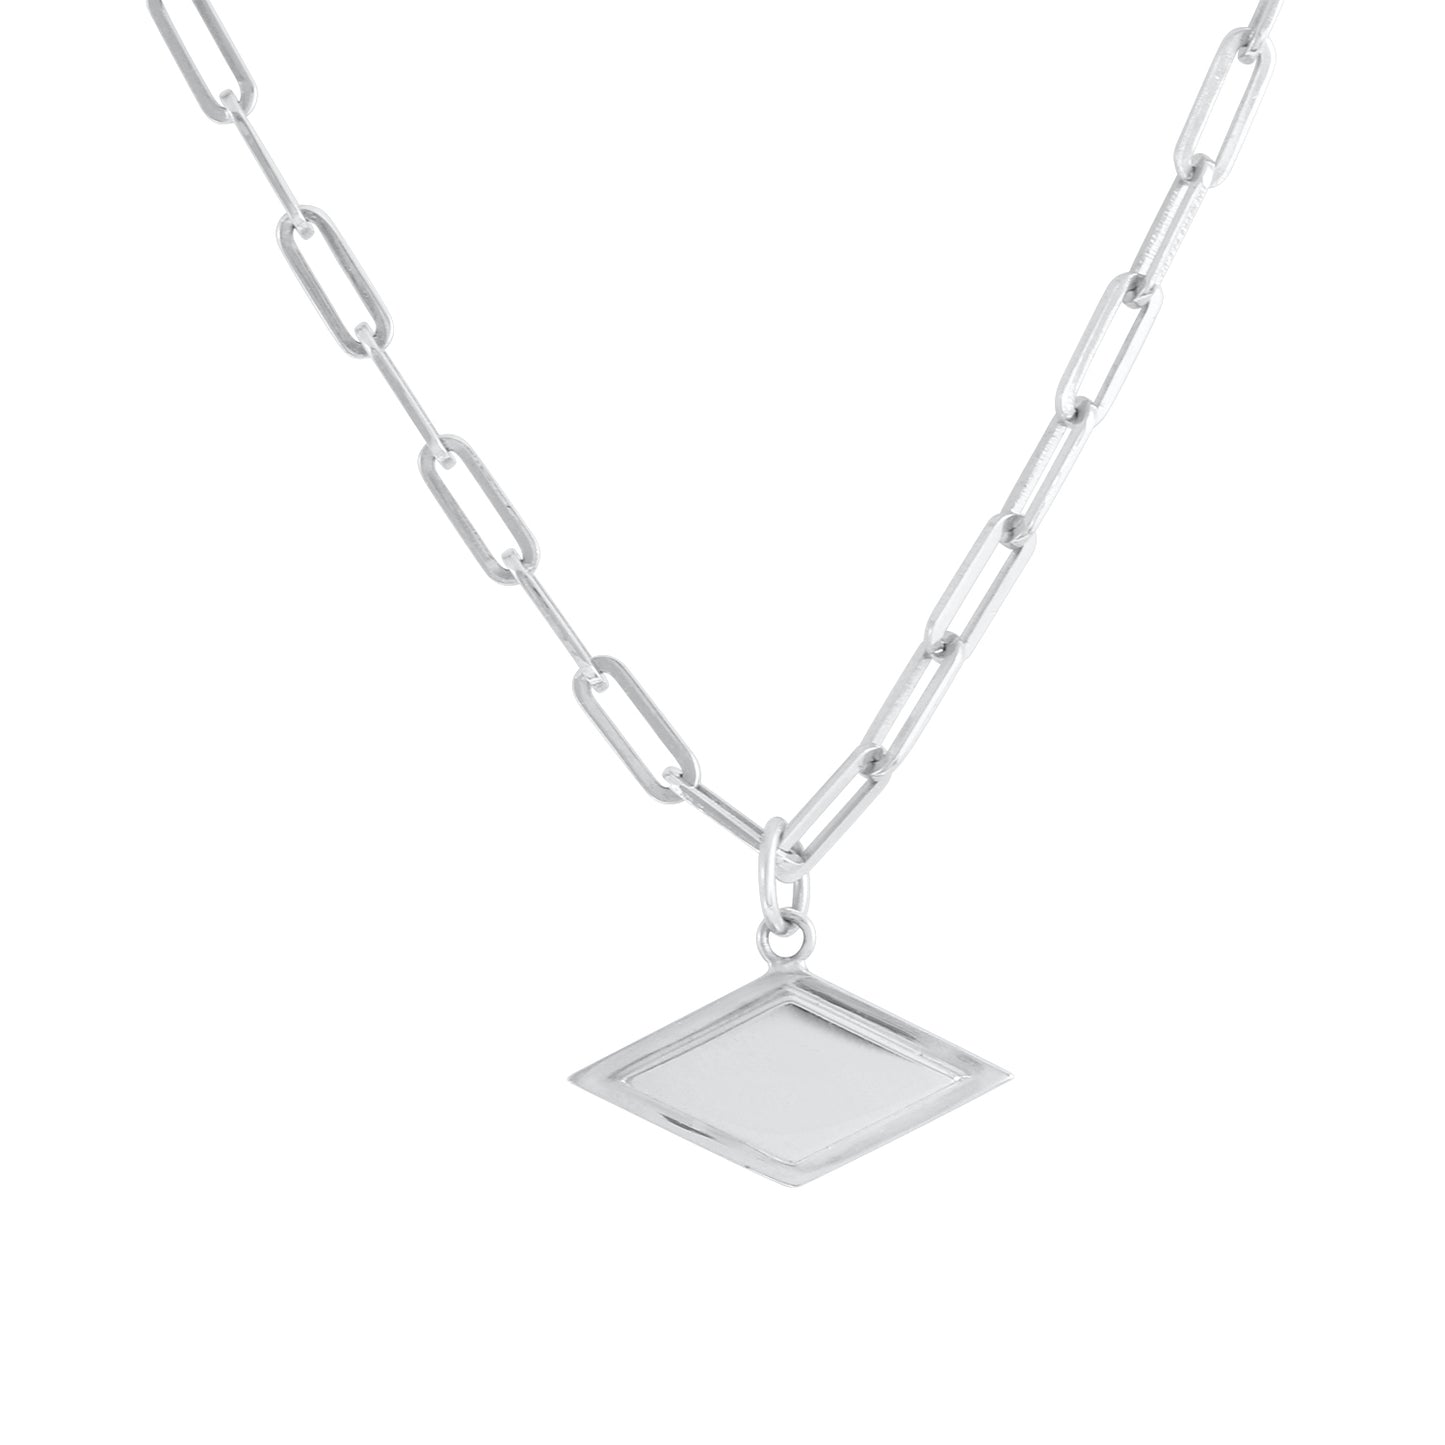 Step Frame Charm Diamond Necklace / Paperclip Chain